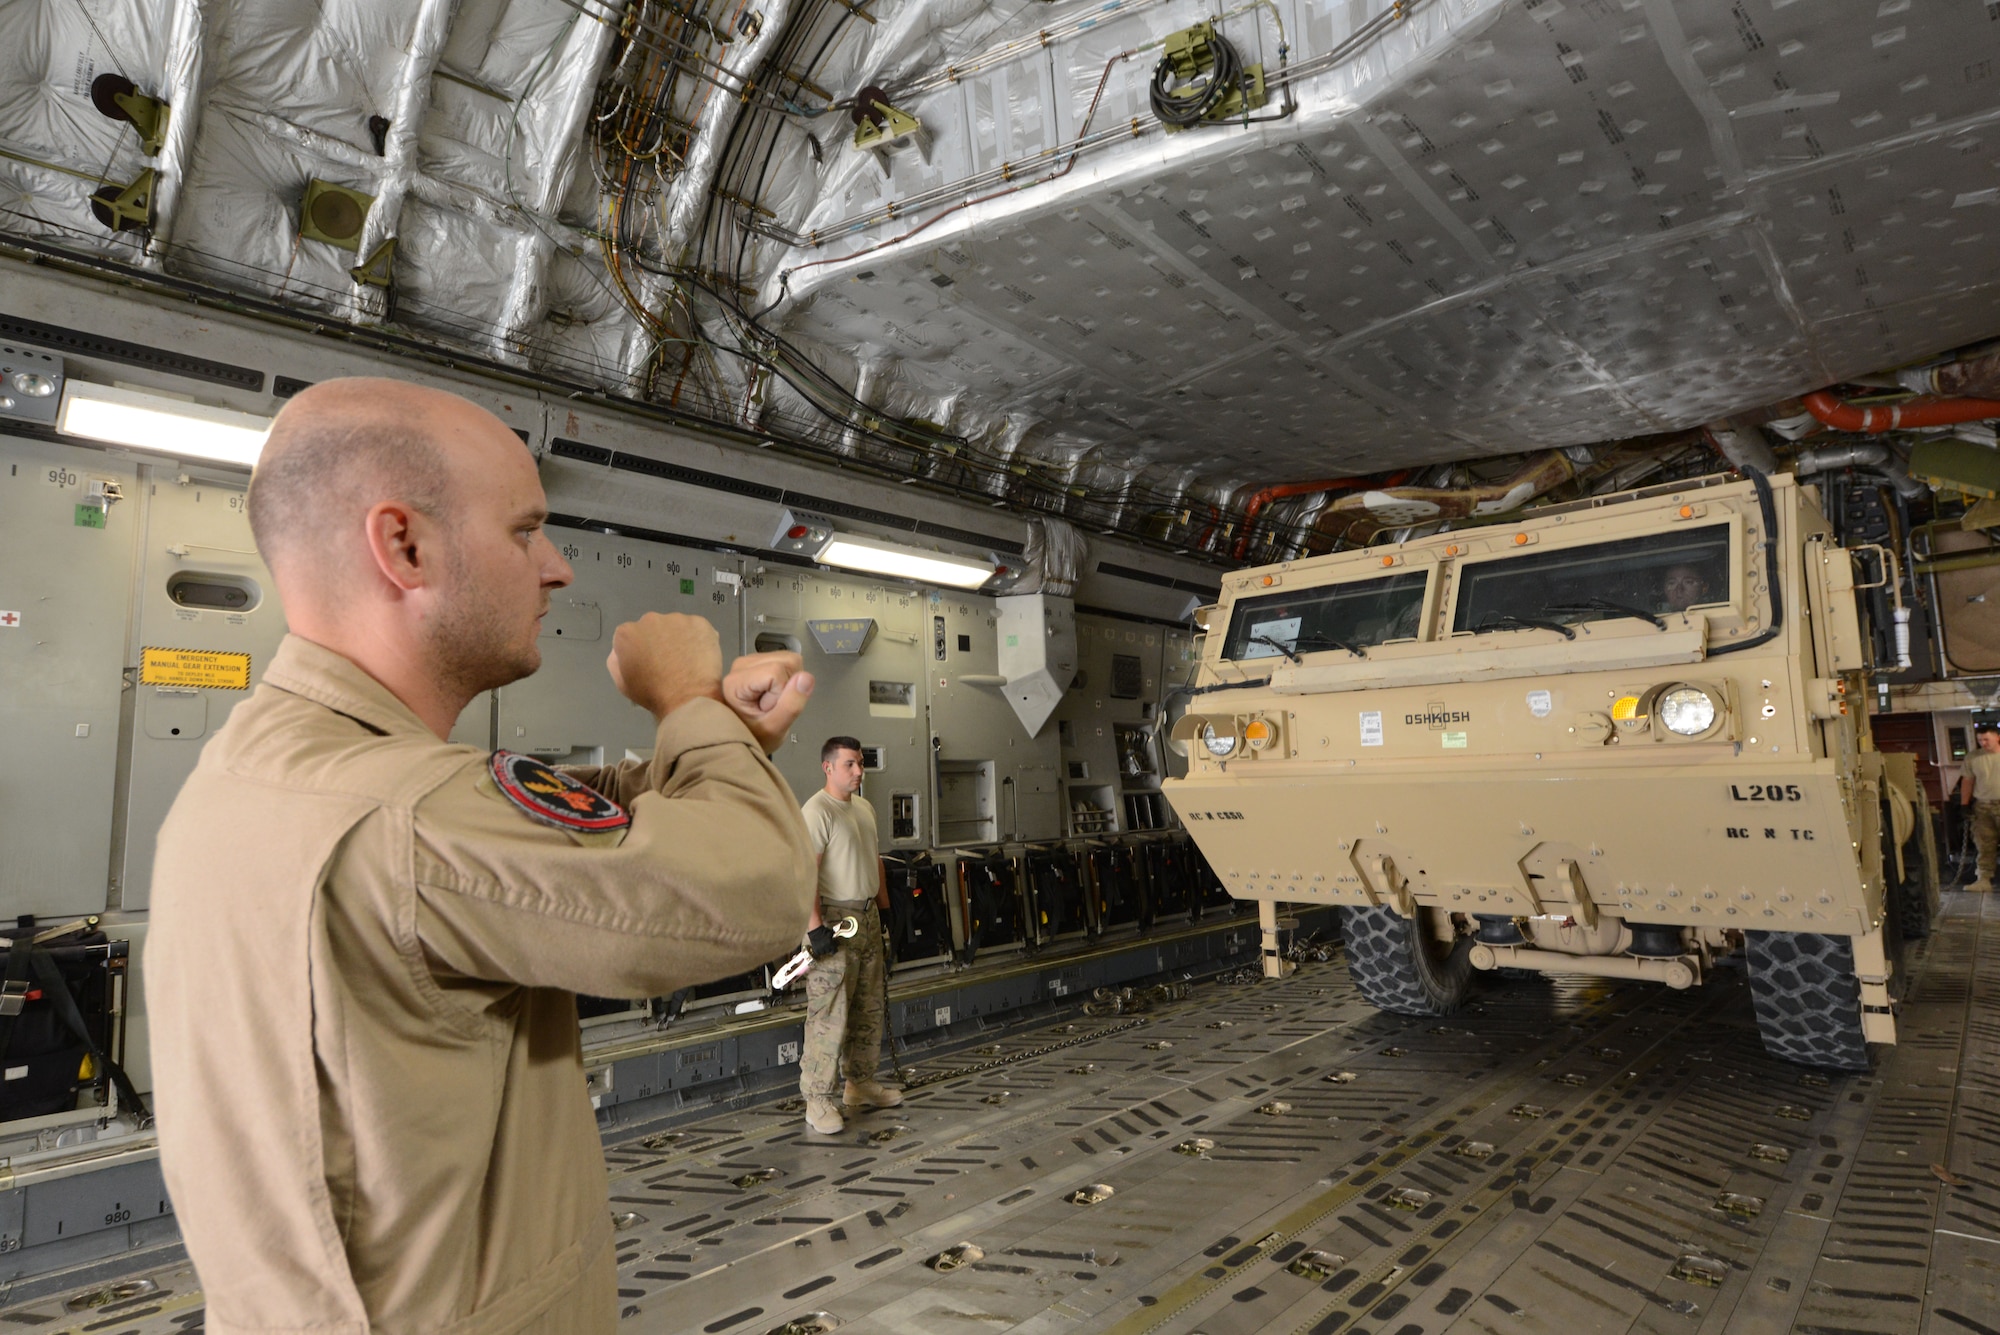 U.S. Air Force Staff Sgt. Doug Wattier, a loadmaster assigned to 816th Expeditionary Airlift Squadron, Detachment 2, signals the driver of a Heavy Expanded Mobility Tactical Truck to stop after backing onto a C-17 Globemaster III while at Mazar-e Sharif, Afghanistan June 24, 2014. Loadmasters are responsible for ensuring where and how vehicles, pallets and equipment are positioned on aircraft. Wattier, a native of Jacksonville, N.C. is deployed from the 317th Airlift Squadron at Joint Base Charleston, S.C. (U.S. Air Force photo by Master Sgt. Cohen A. Young/Released)  